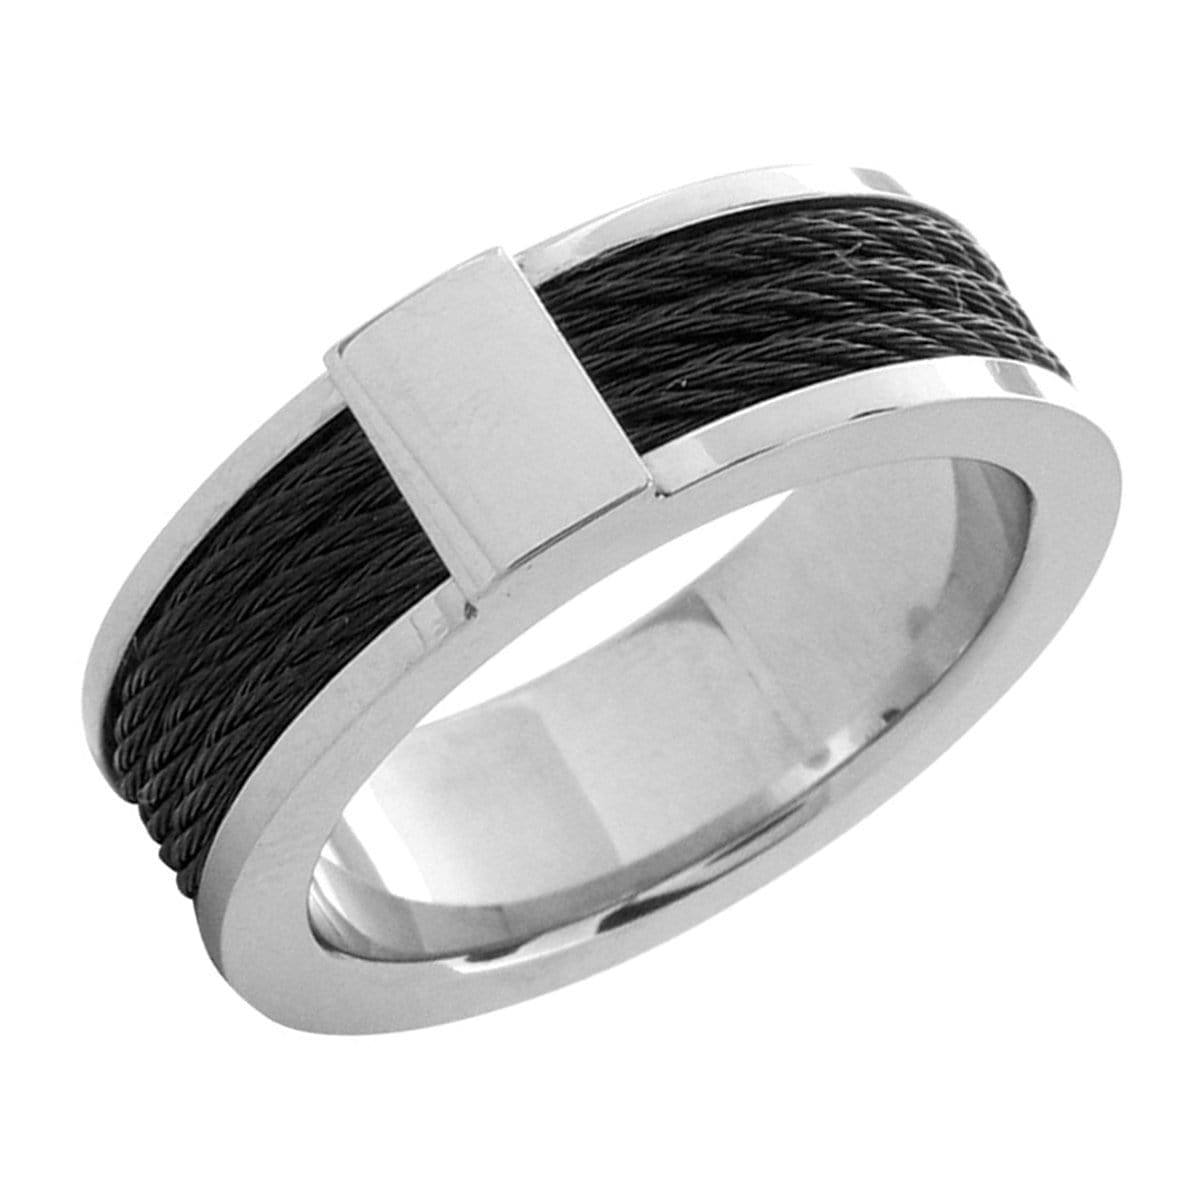 INOX JEWELRY Rings Black and Silver Tone Stainless Steel Ring with Three Inlaid Cables